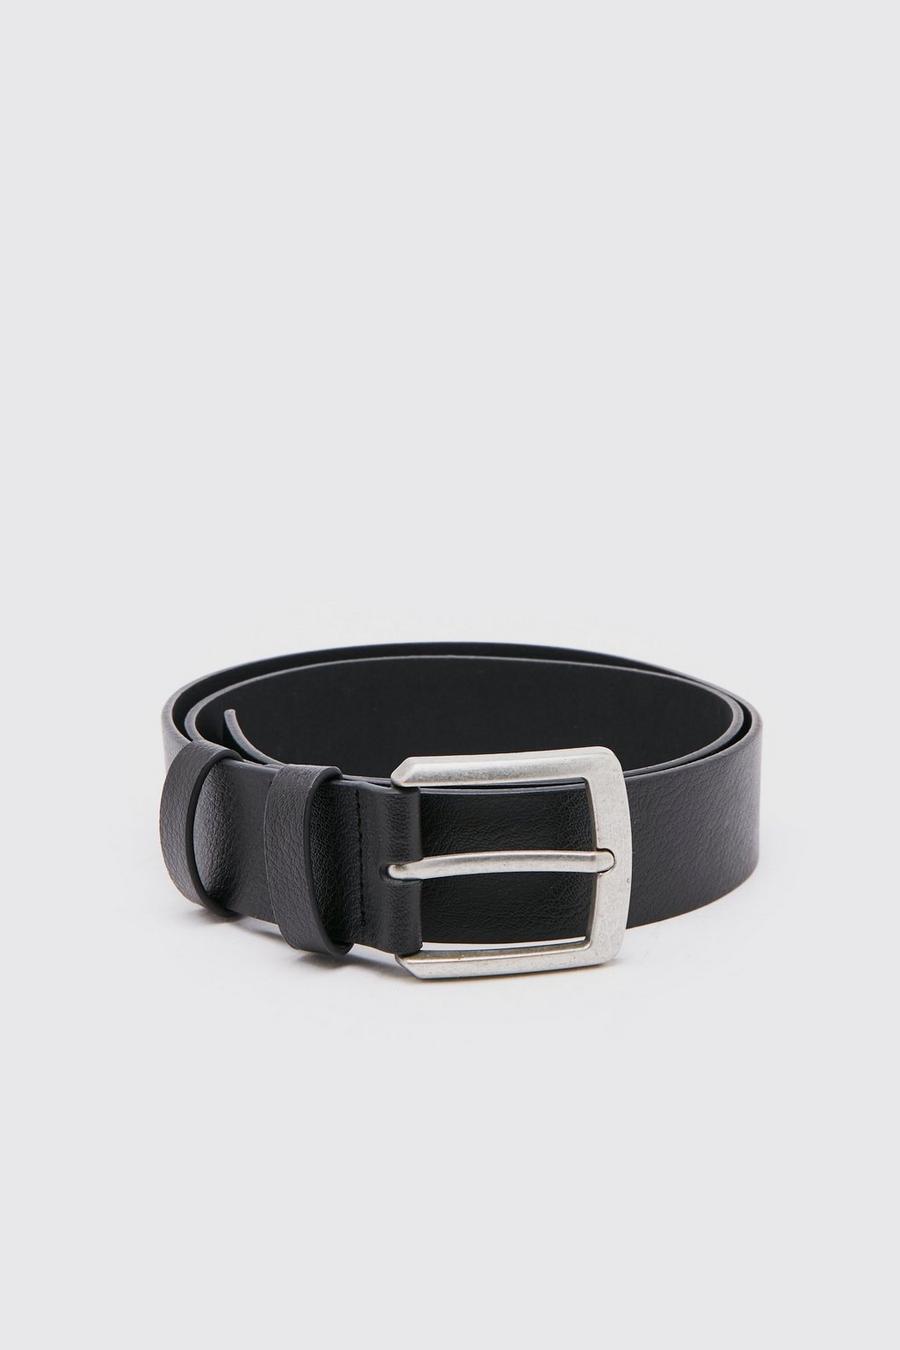 Black Casual Leather Look Jeans Belt